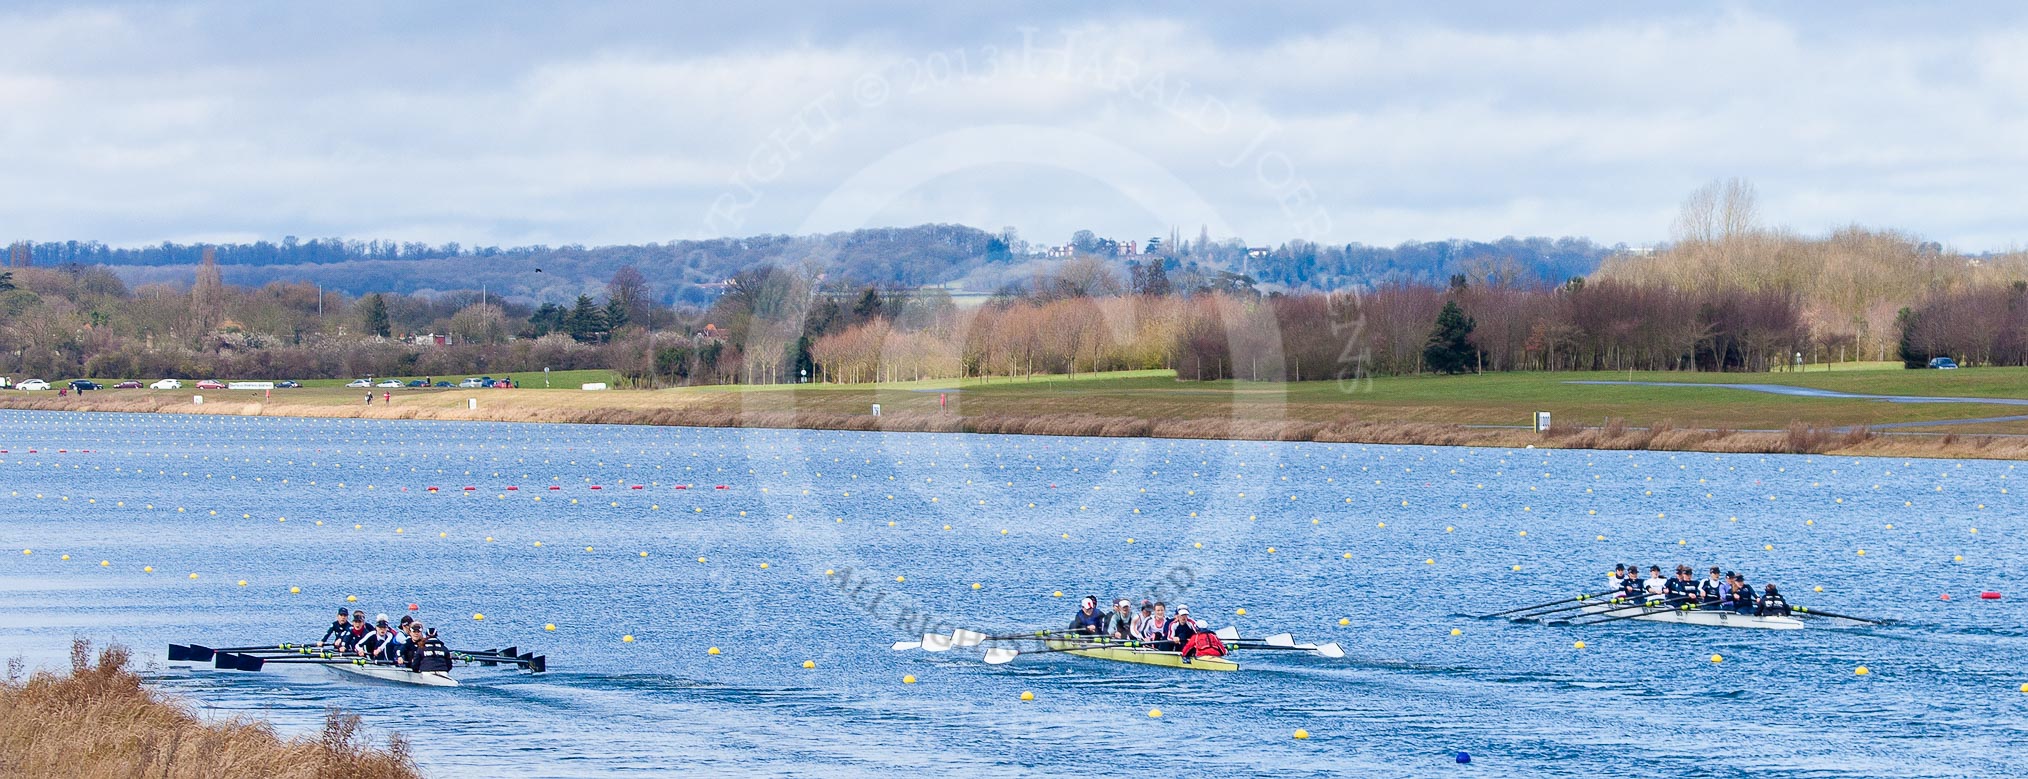 The Boat Race season 2013 - fixture OUWBC vs Olympians: Racing down Dorney Lake, on the left the OUWBC Blue Boat, in the middle the Olympians, and on the right Osiris, the OUWBC reserve boat..
Dorney Lake,
Dorney, Windsor,
Buckinghamshire,
United Kingdom,
on 16 March 2013 at 11:56, image #173